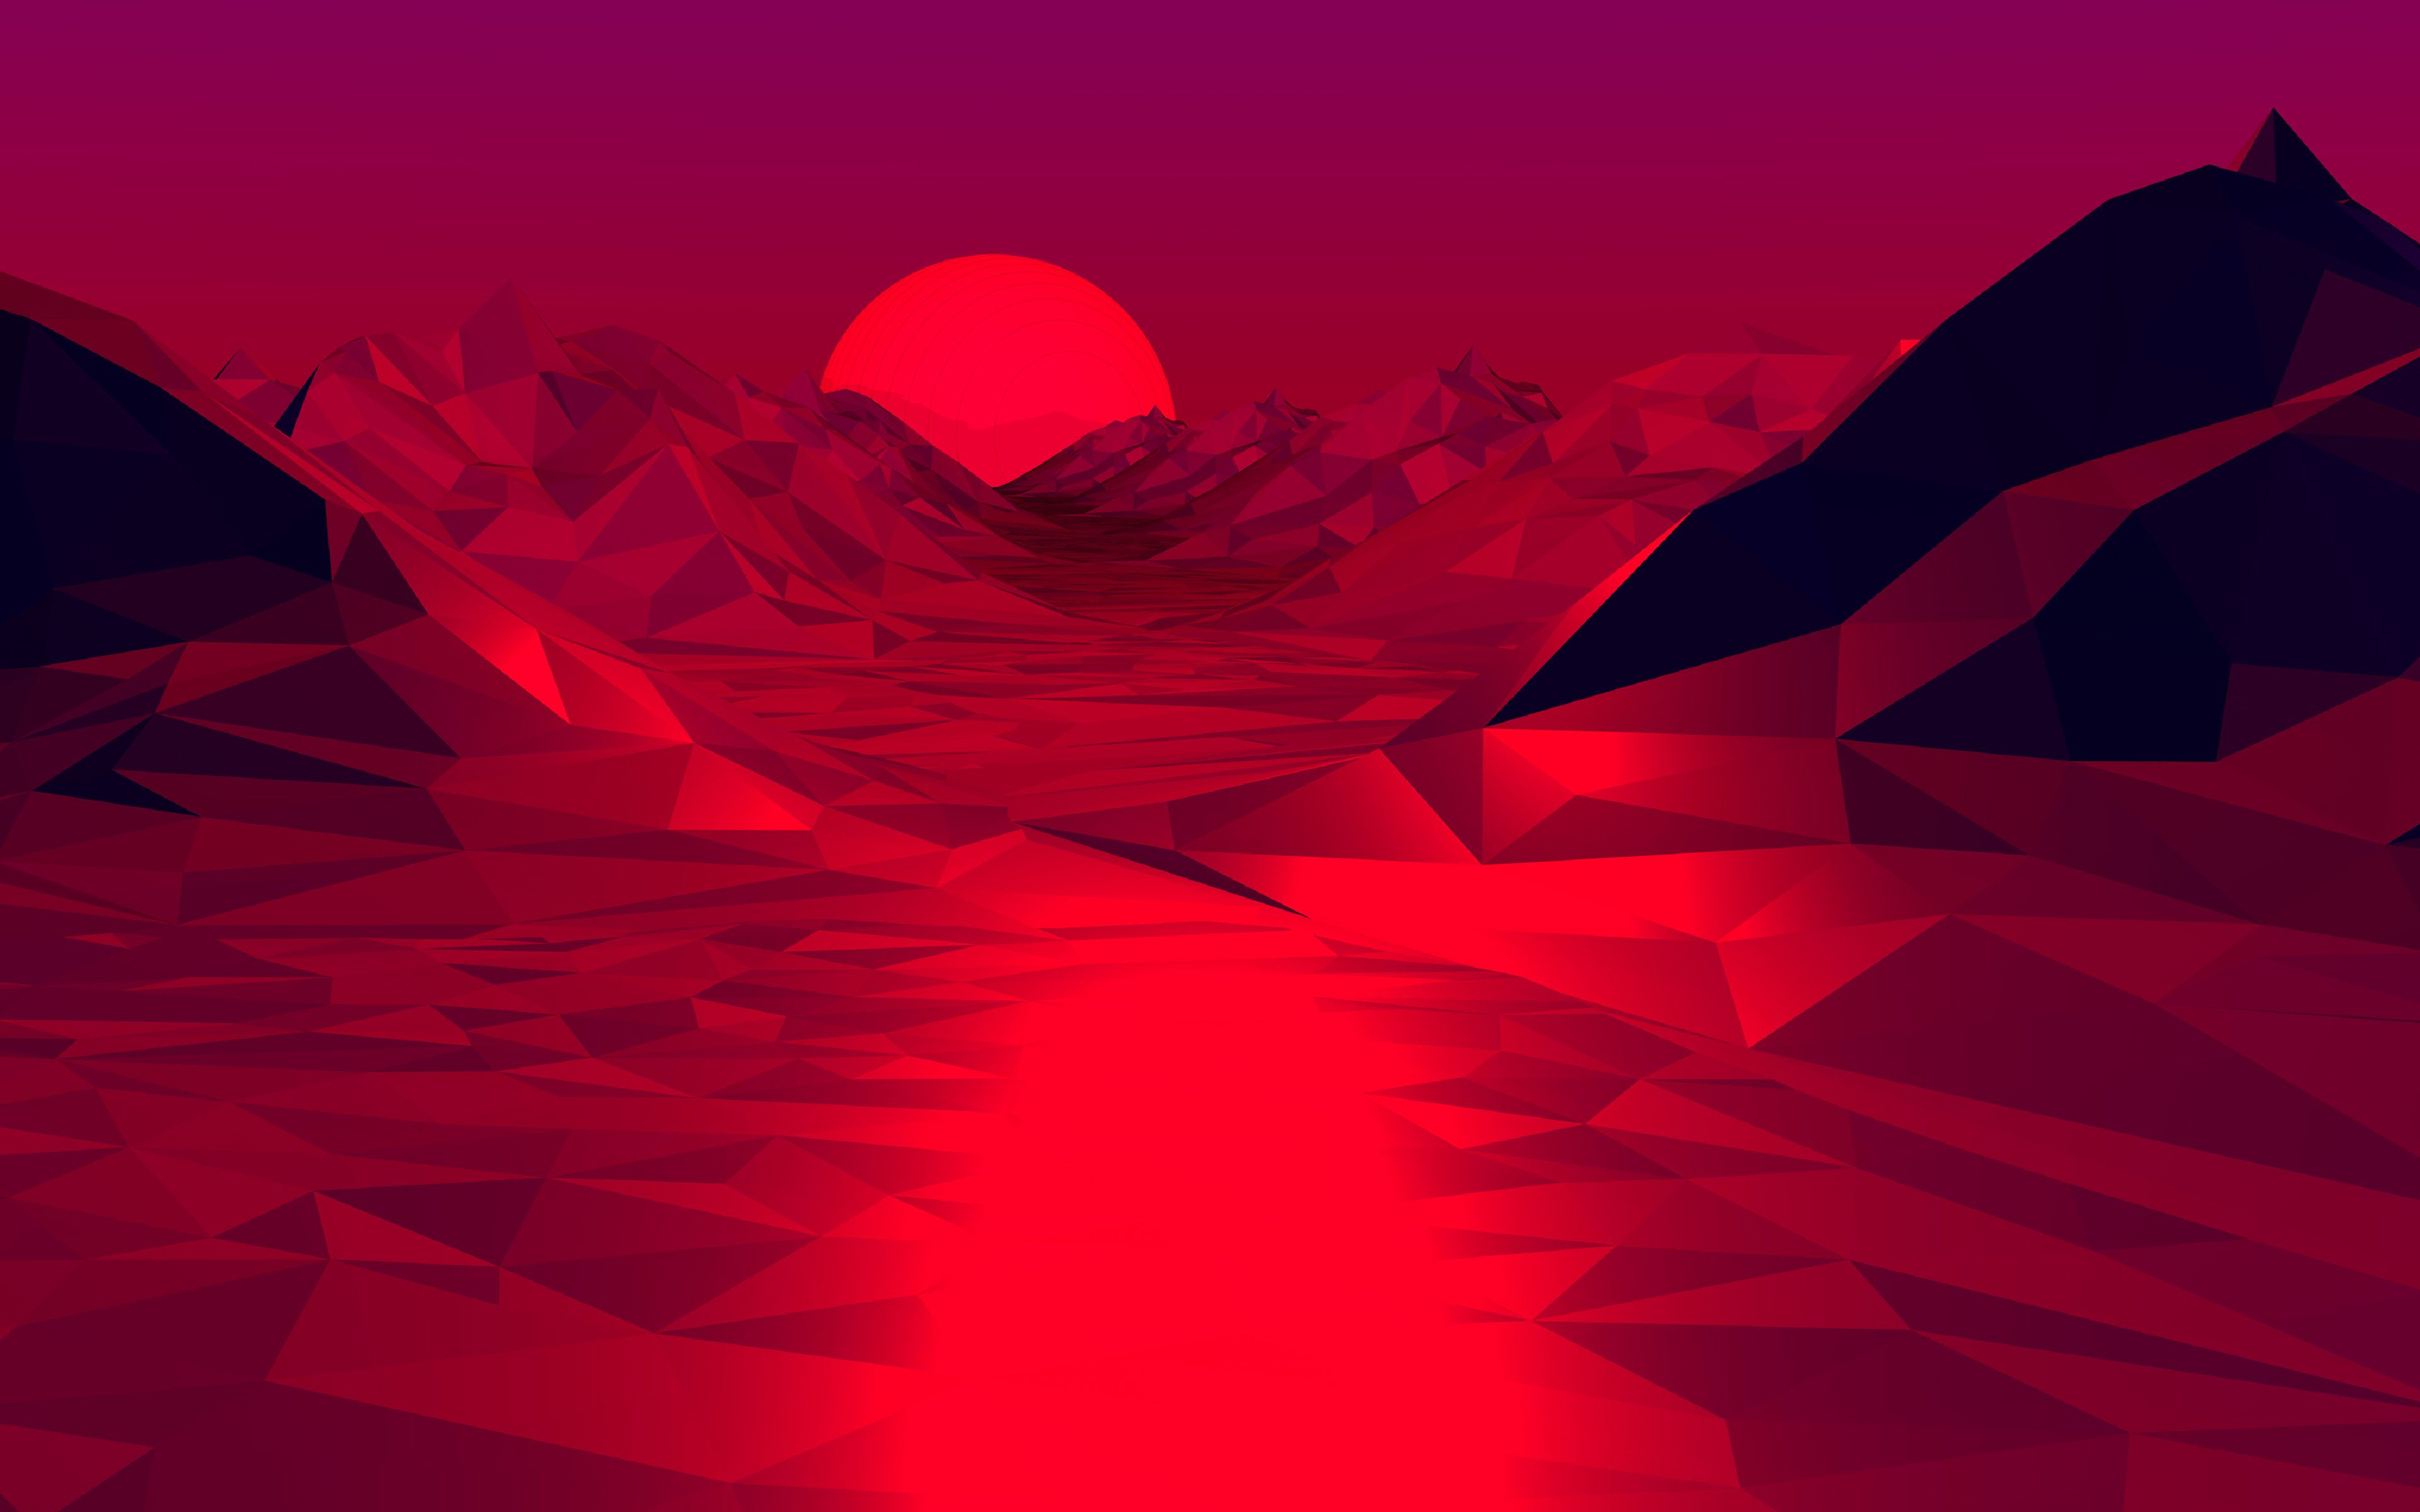 A low poly landscape with mountains and water - Landscape, 3D, low poly